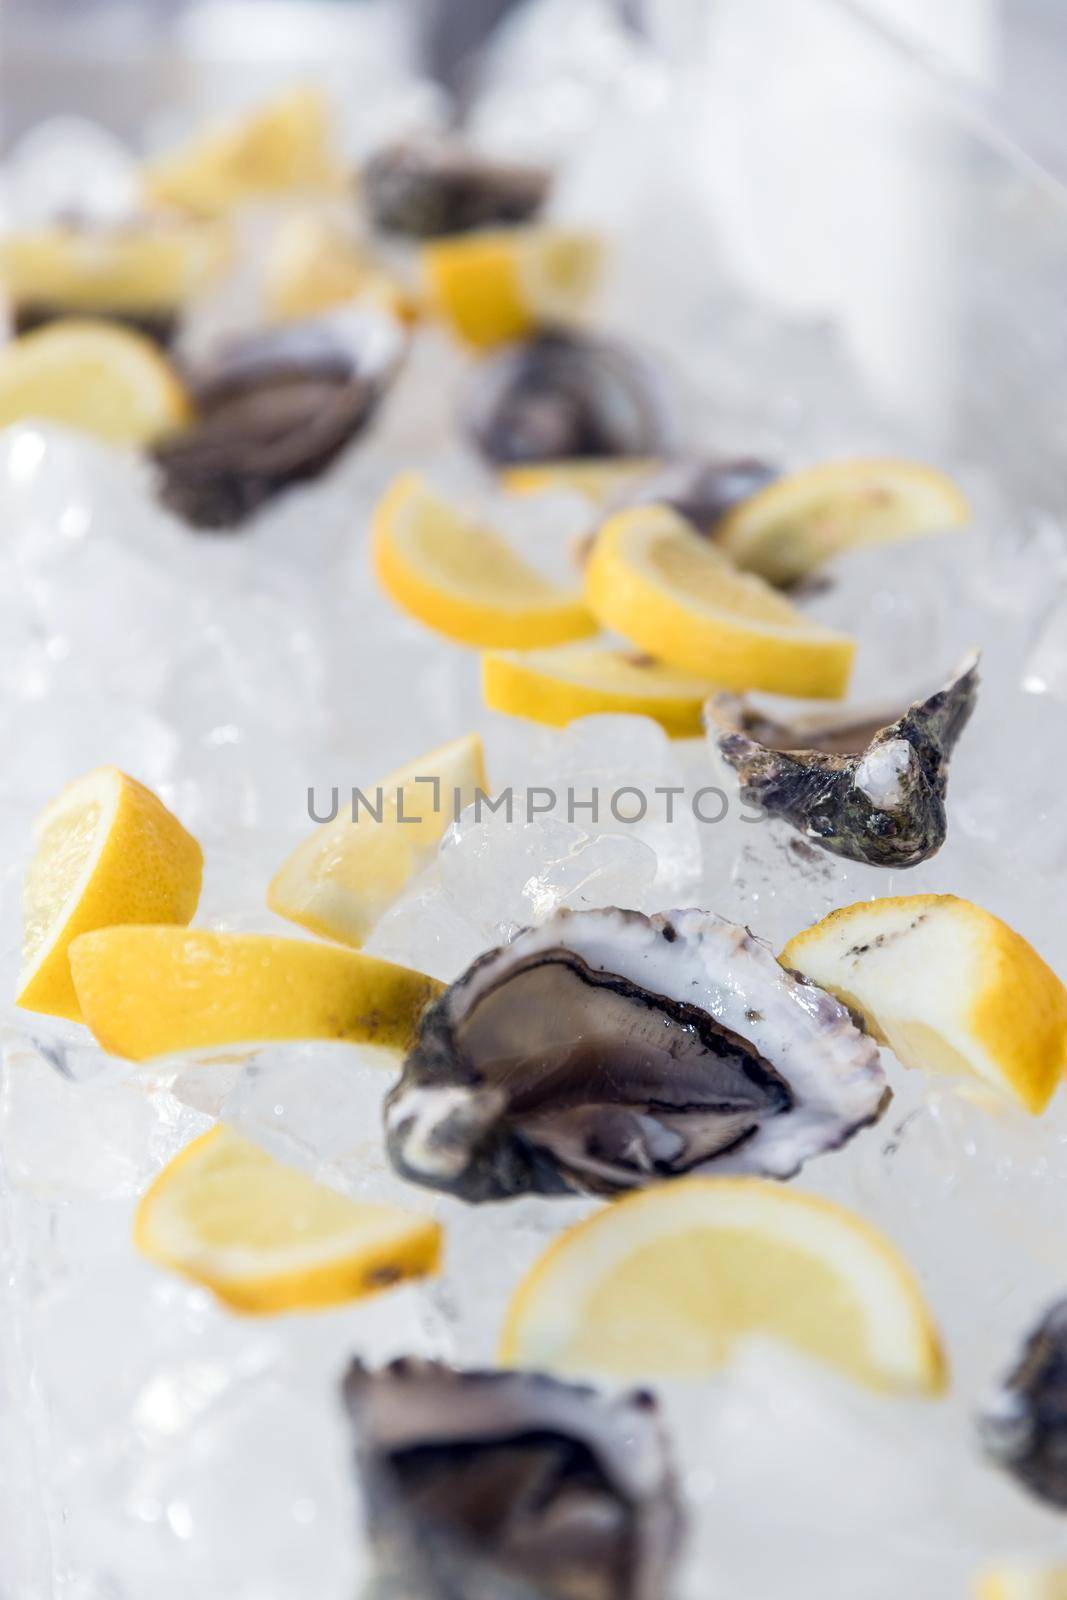 Oysters on ice with lemon by germanopoli